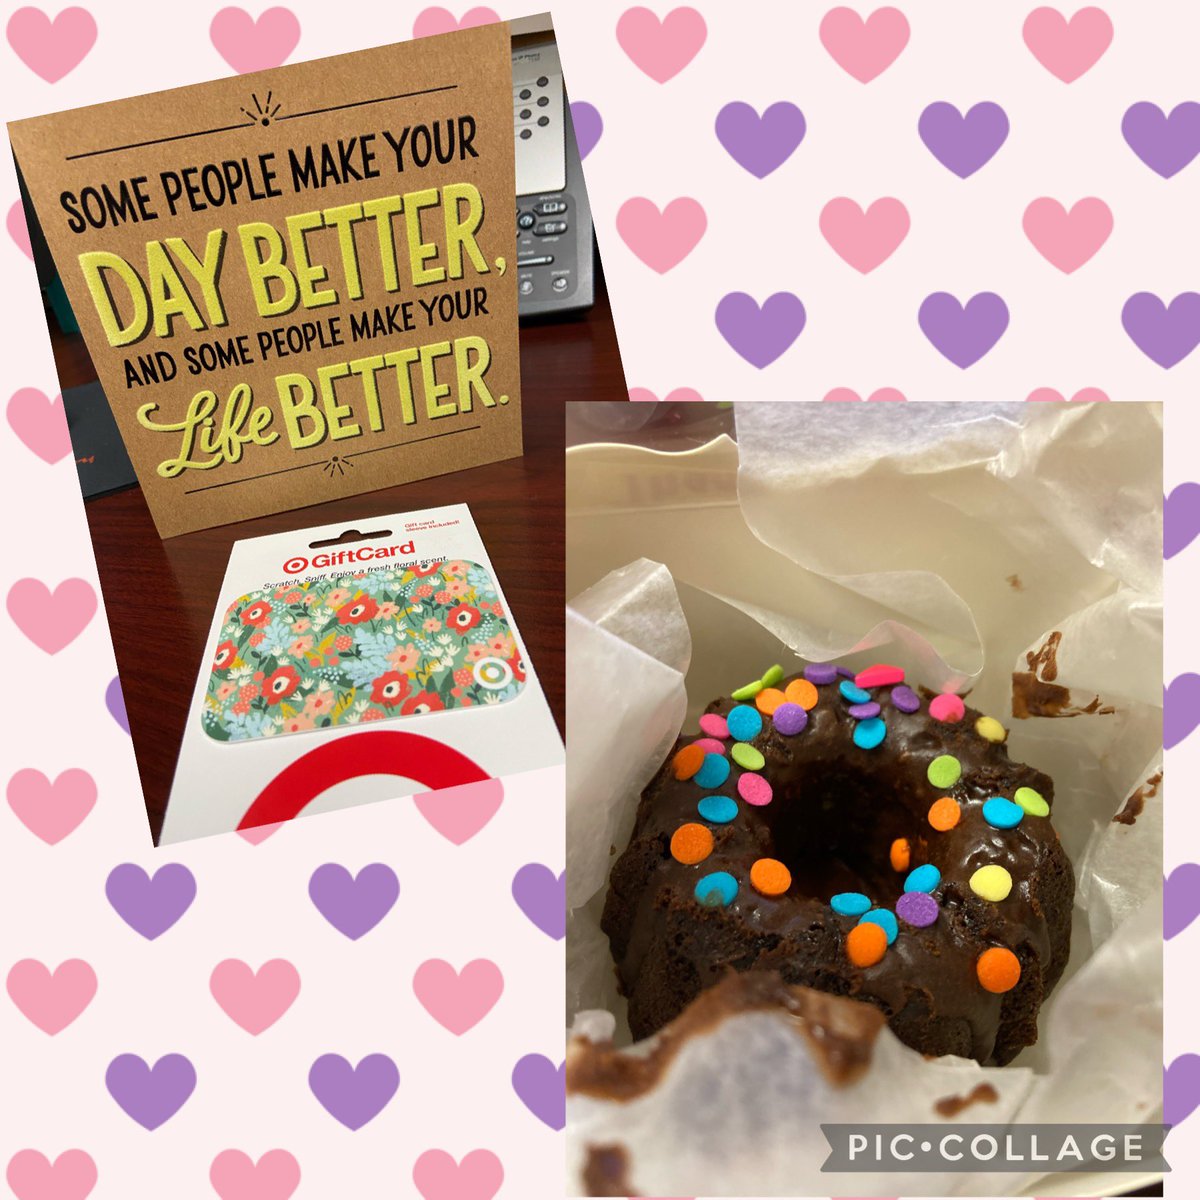 🥰Beyond thankful for my scholars, faculty & staff for spoiling me this week. Thank you 2nd, 4th, SPED and @mmarqu27 @jzamora_BES for my thoughtful gifts. I am grateful to be your School counselor!! 🙏🏻❤️@jpb_coyotes_BES #TeamSISD #NSCW21